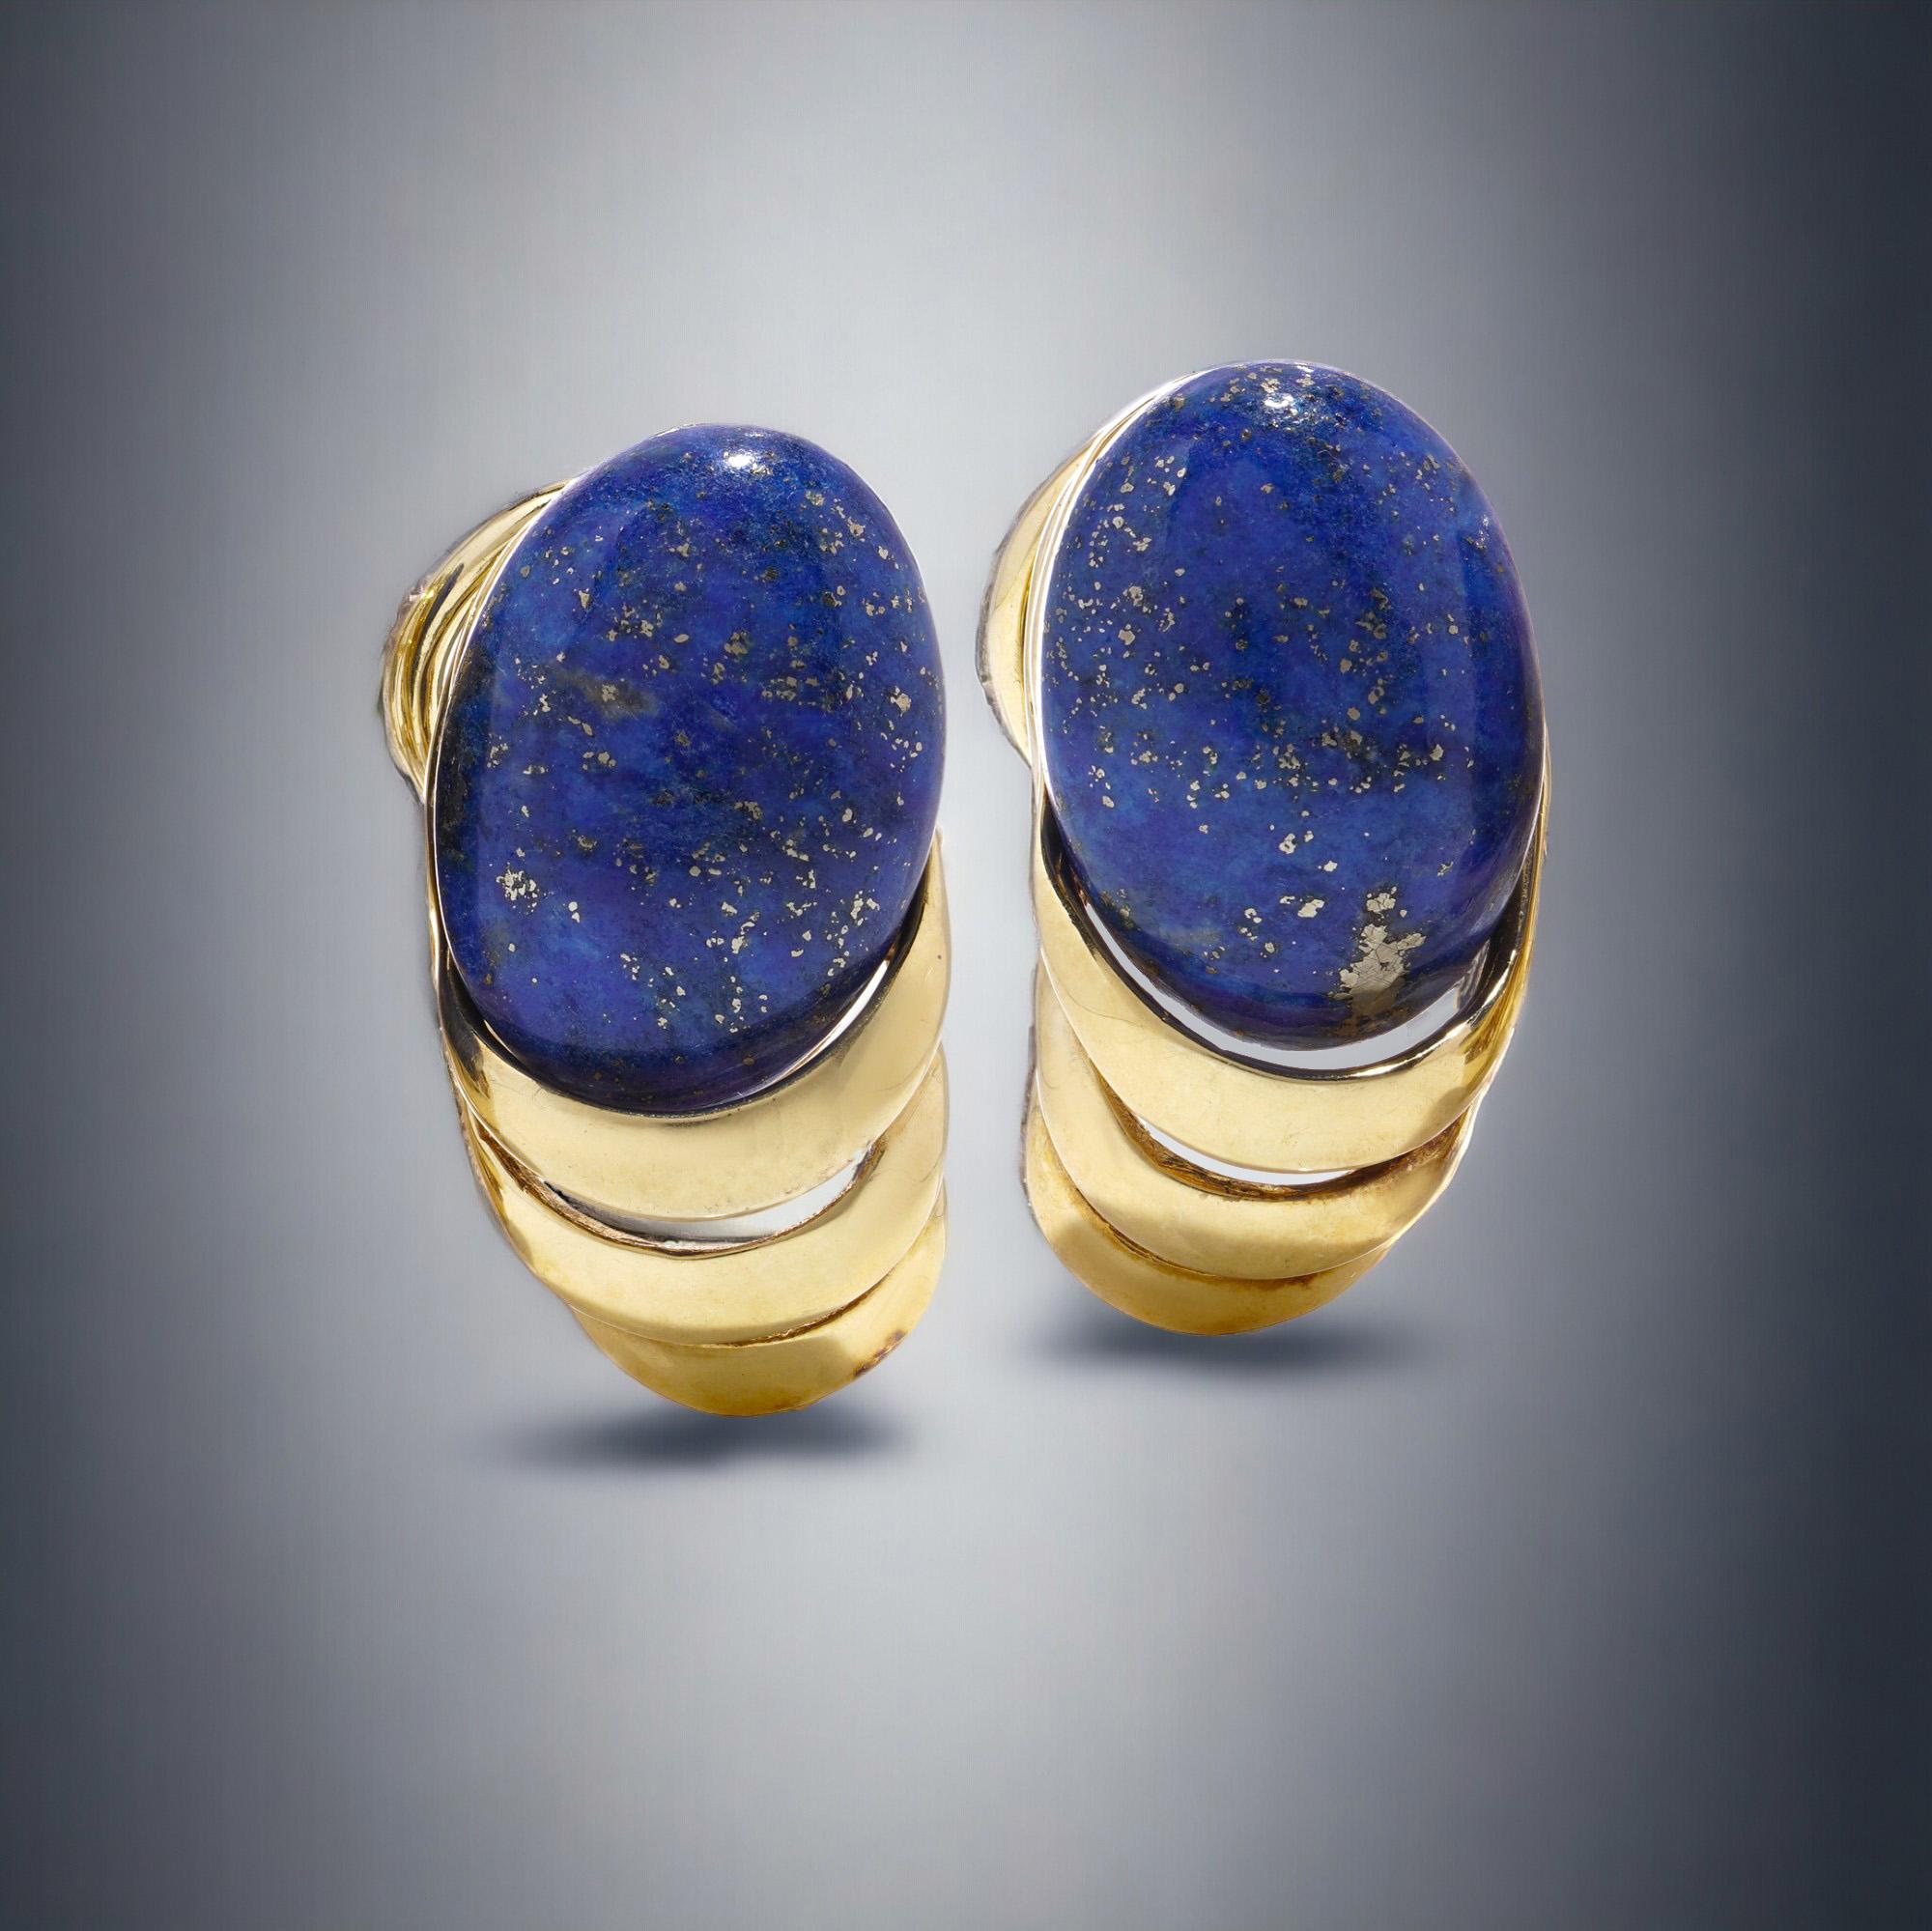 Vintage 14kt Yellow Gold Clip-On Stud Earrings with Oval Cabochon Lapis Lazuli Stones.

These stunning vintage earrings feature a pair of oval cabochon lapis lazuli stones set in 14kt yellow gold. Each earring is hallmarked with 